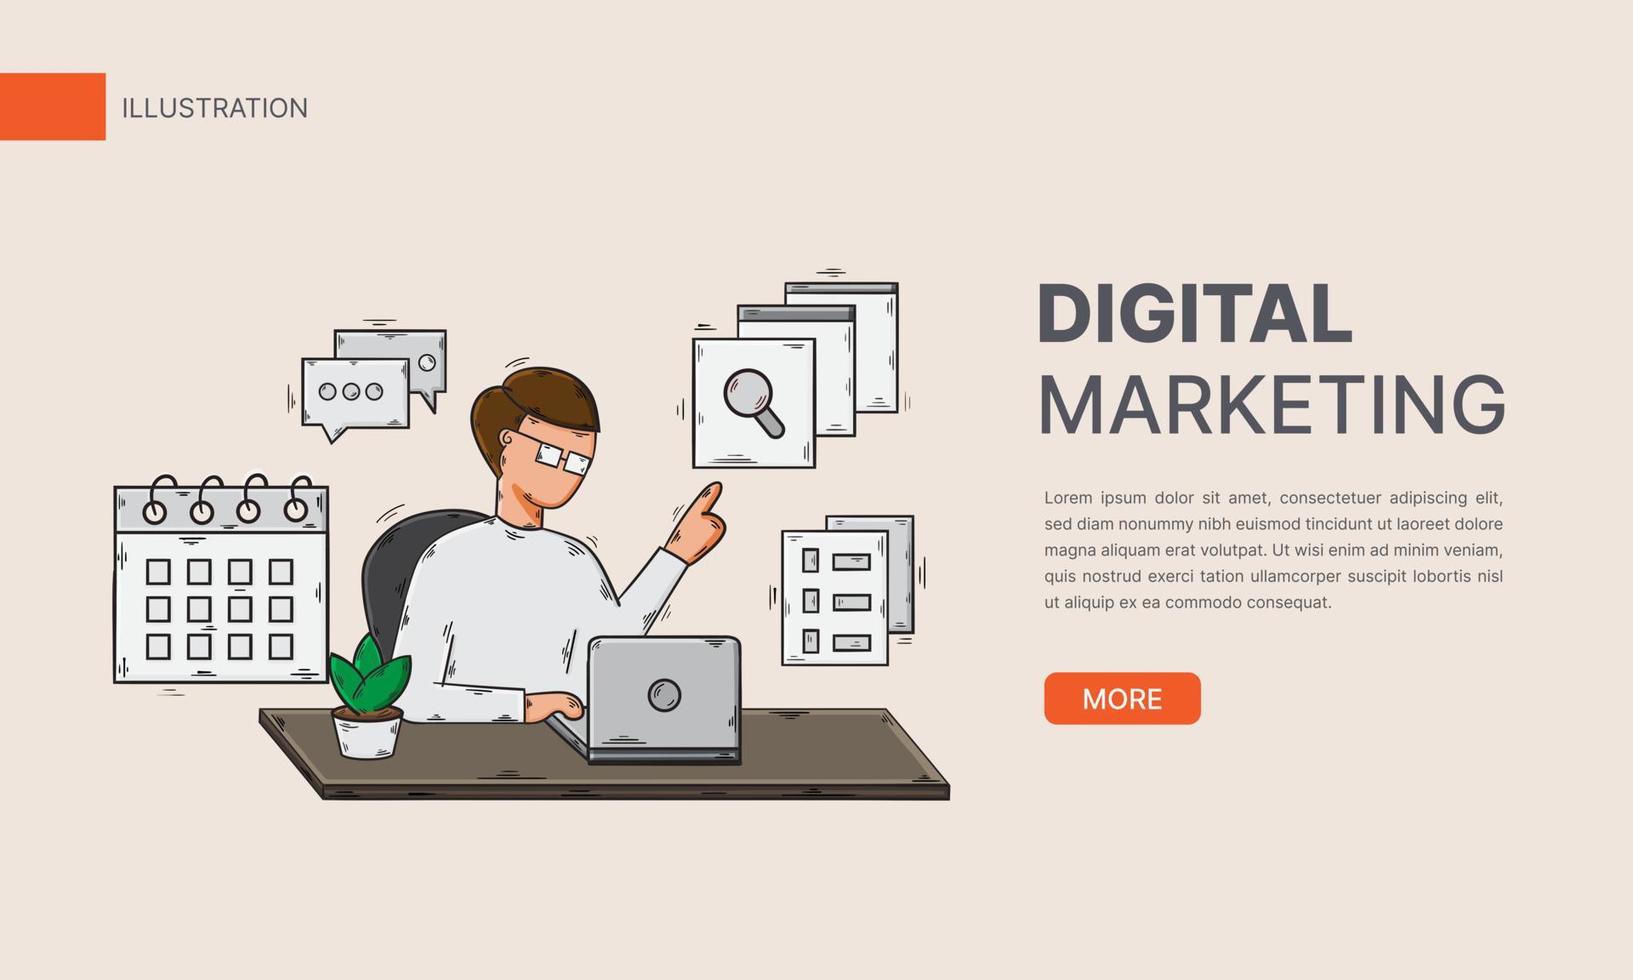 Digital marketing concept hand drawn flat illustration or man with laptop using tools and services for business vector